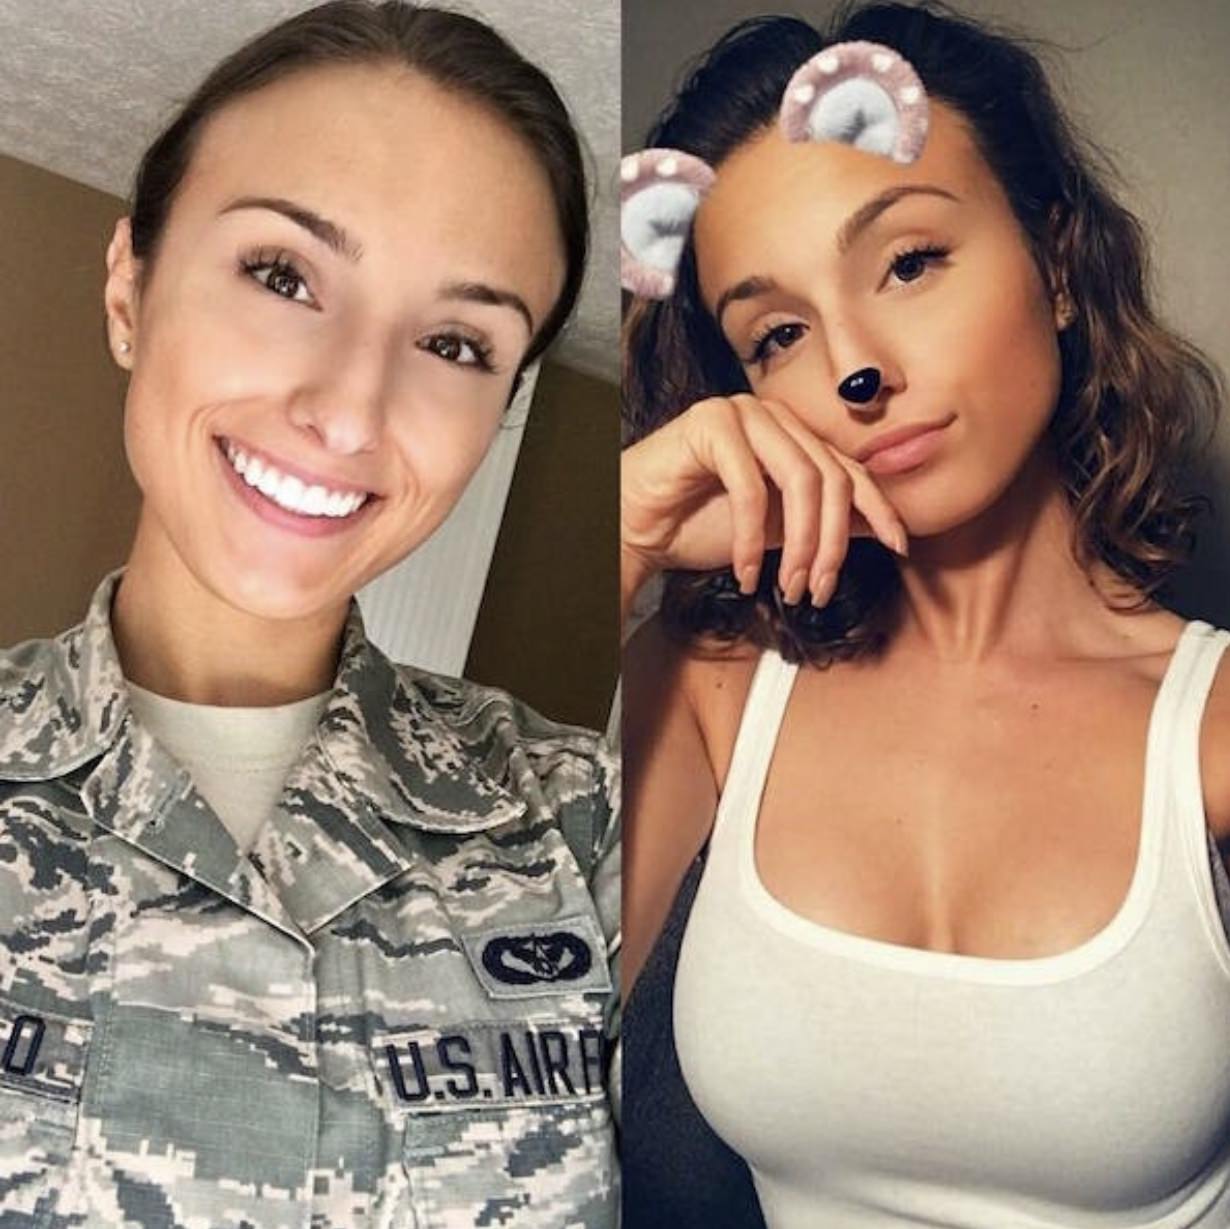 Hot Air Force woman in uniform, and taking a snapchat selfie in a lowcut white tanktop